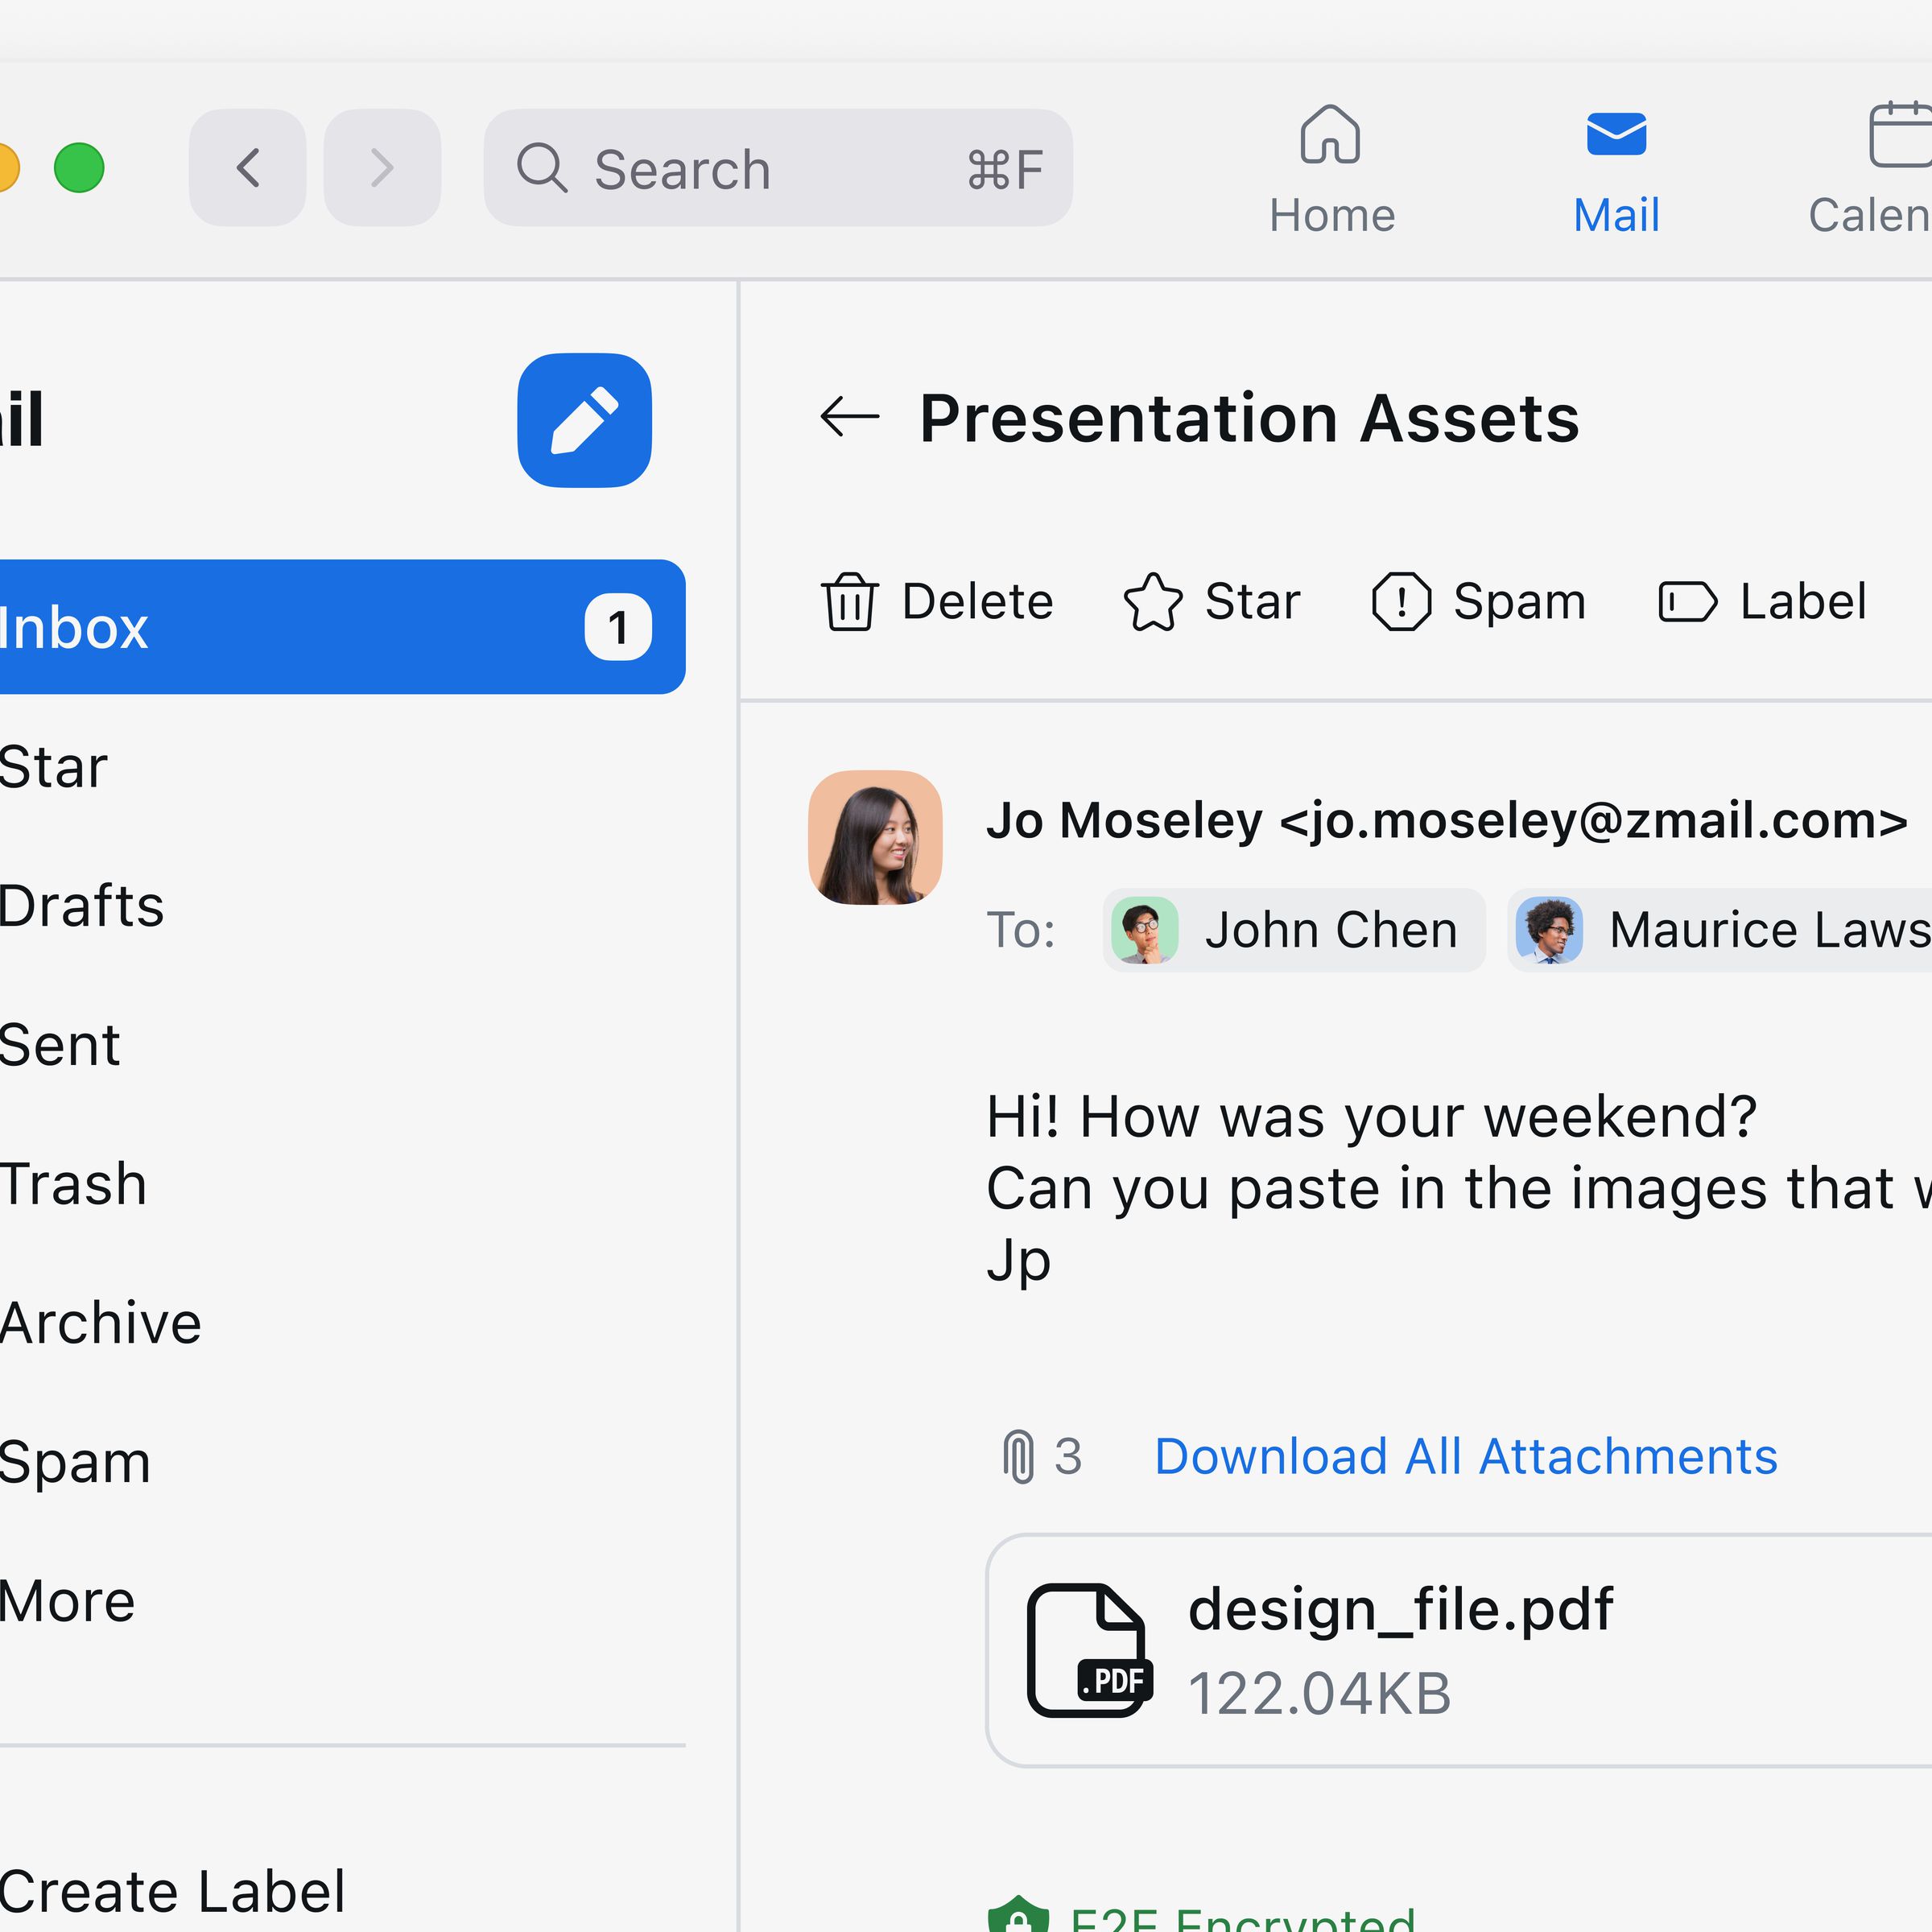 Zoom mail application is built into Zoom One, there’s tabs on top for Mail, Calendar, Meetings, Team Chat, and more. The side bar has Inbox, drafts, and more email app folders, and the main body is an email thread.